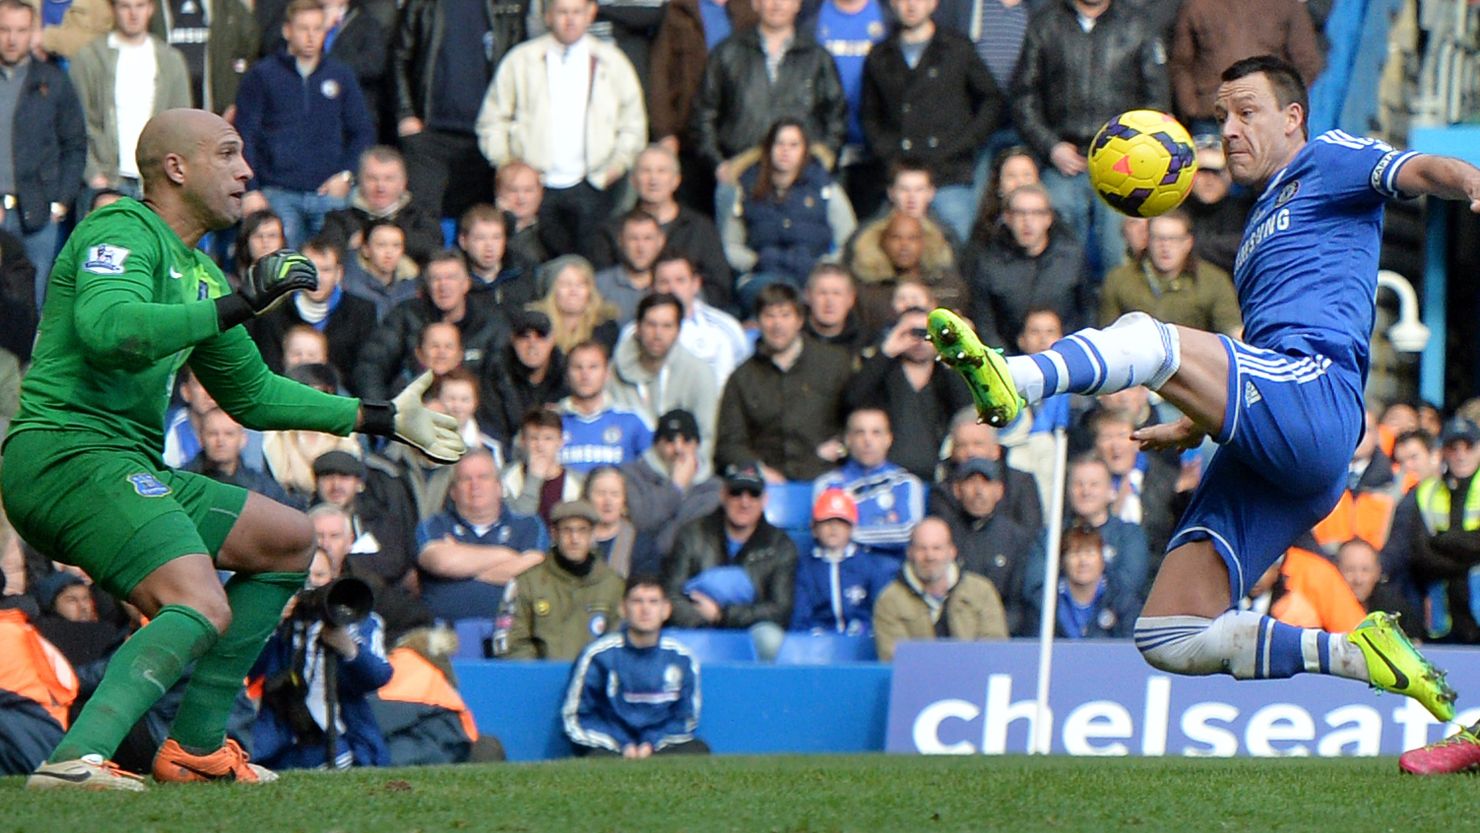 John Terry, right, netted past Tim Howard as Chelsea beat Everton 1-0 in the Premier League.  